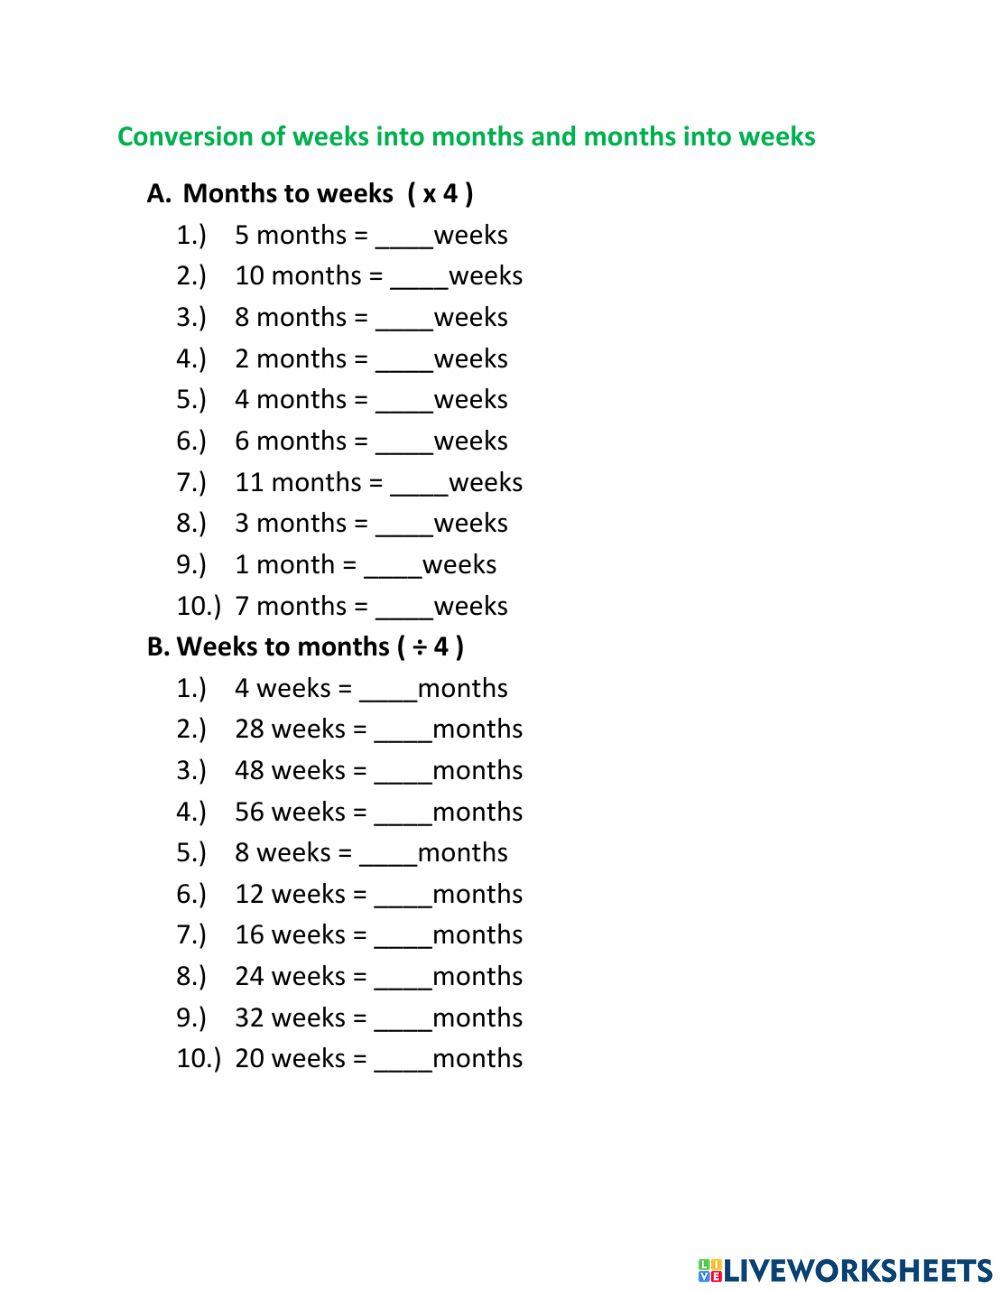 Conversion of Weeks to months and months to weeks